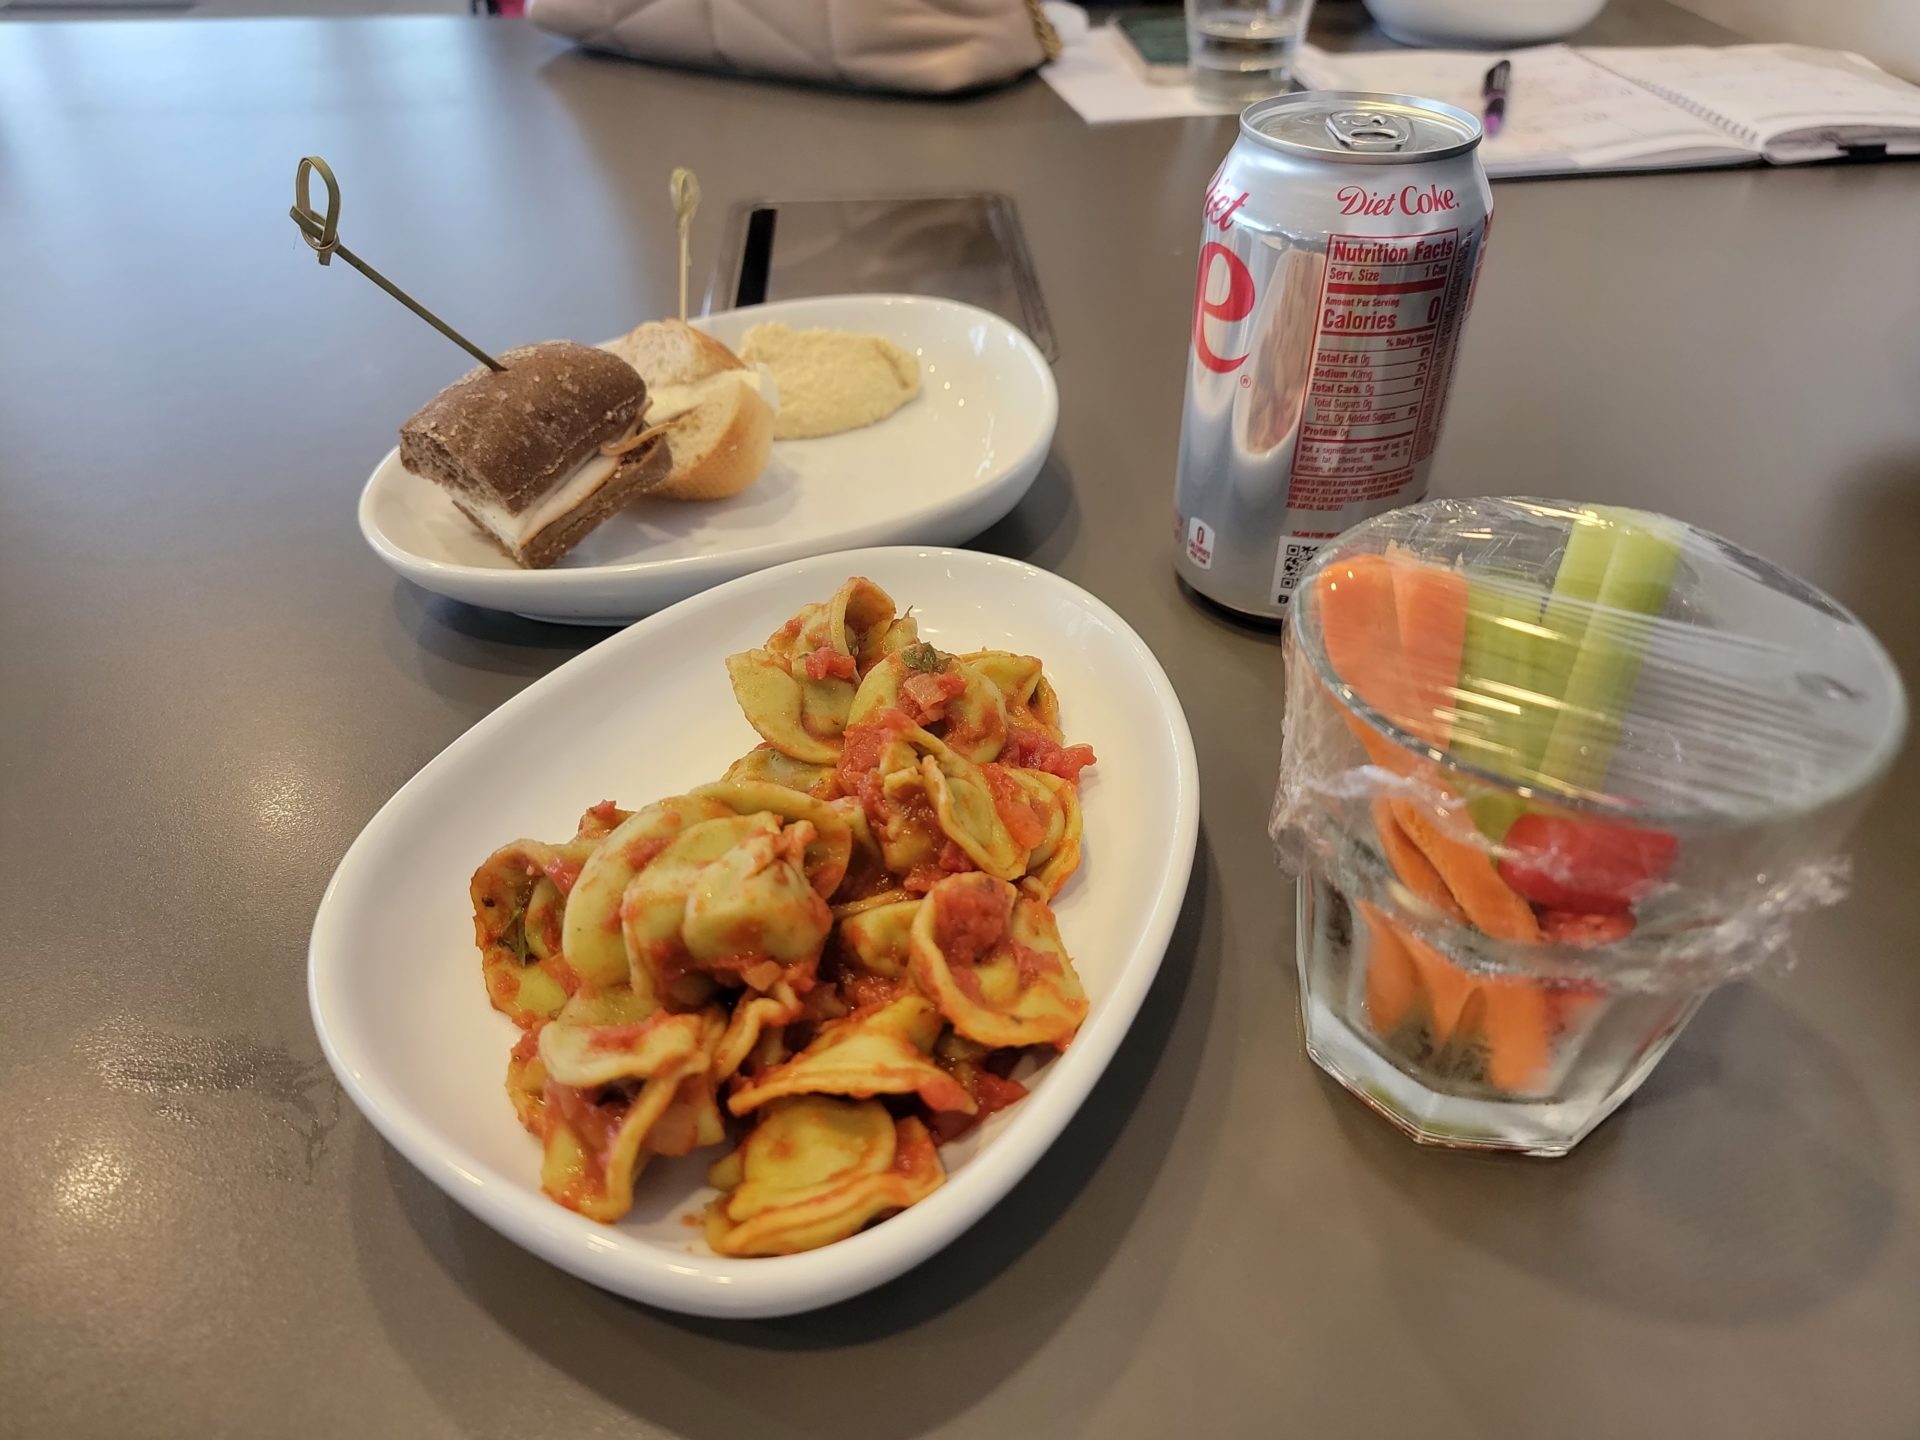 a plate of food and a soda on a table